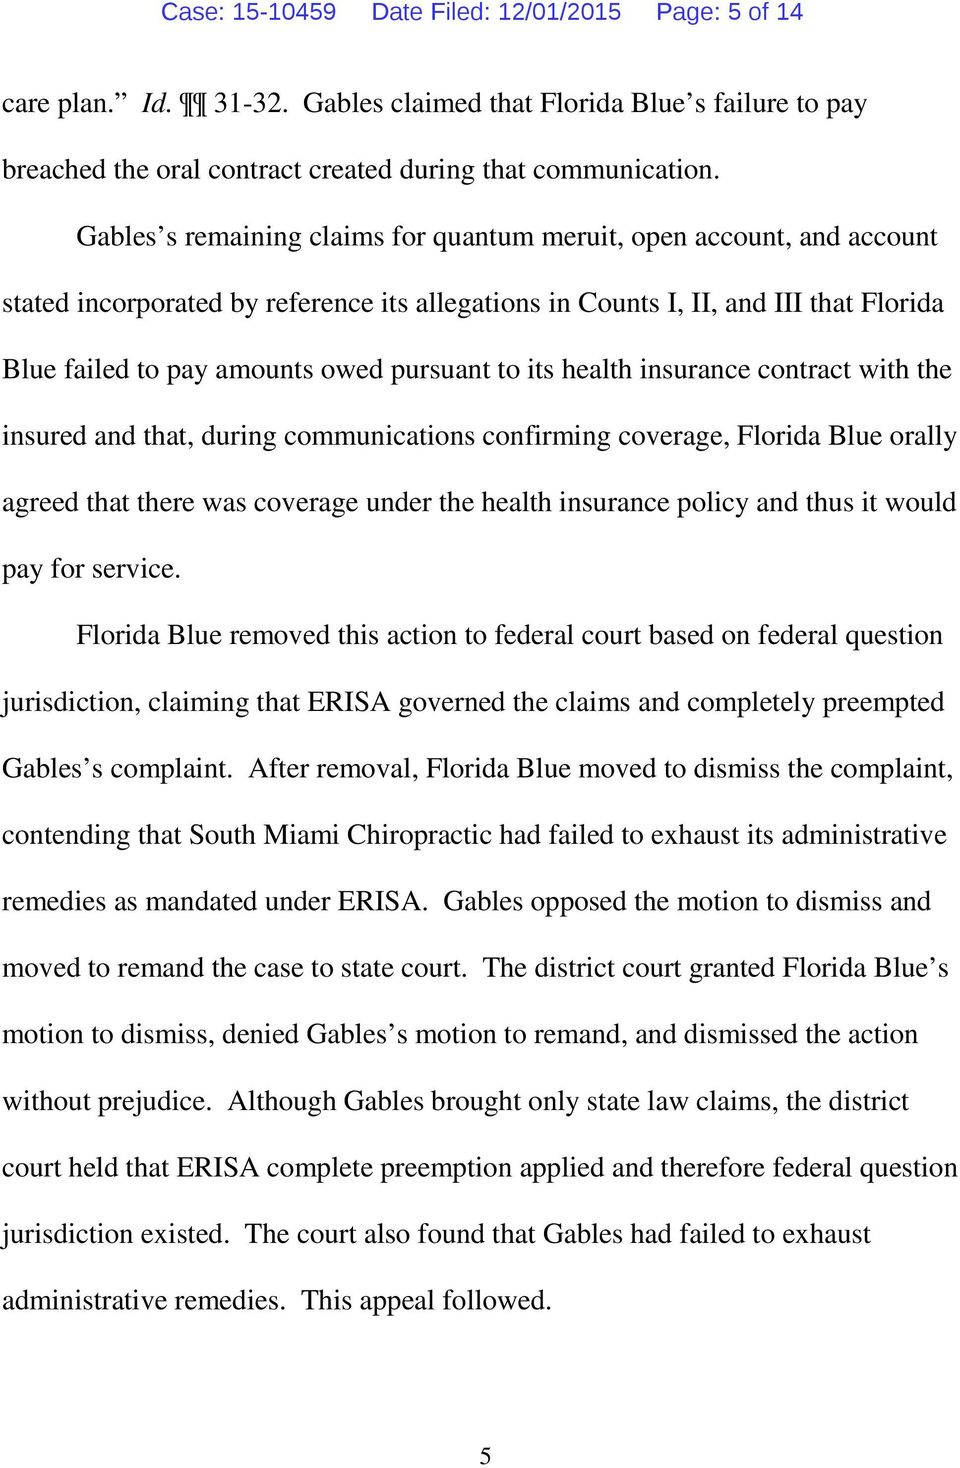 to its health insurance contract with the insured and that, during communications confirming coverage, Florida Blue orally agreed that there was coverage under the health insurance policy and thus it